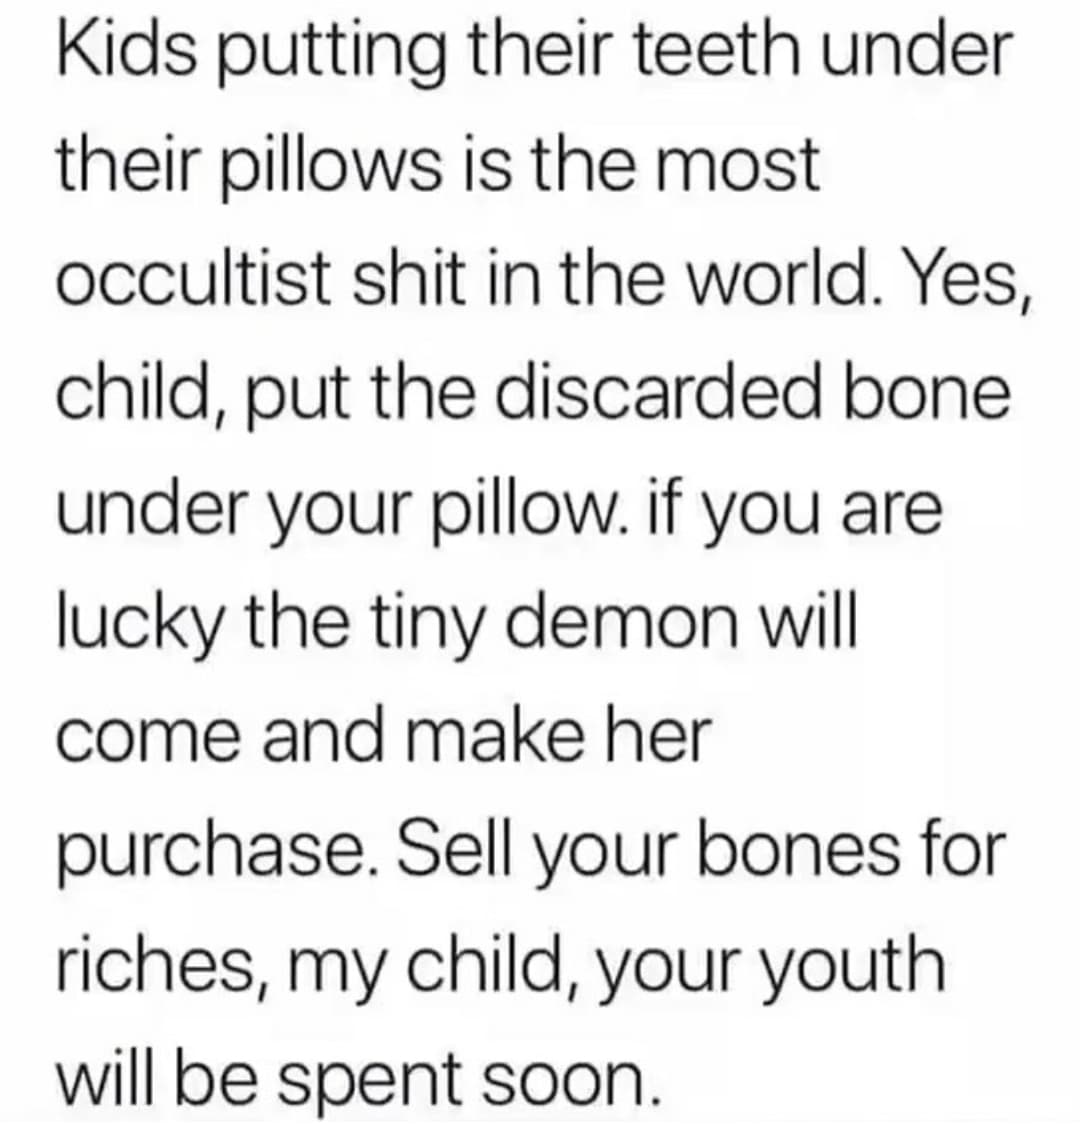 Lorenz system - Kids putting their teeth under their pillows is the most occultist shit in the world. Yes, child, put the discarded bone under your pillow. if you are lucky the tiny demon will come and make her purchase. Sell your bones for riches, my chi